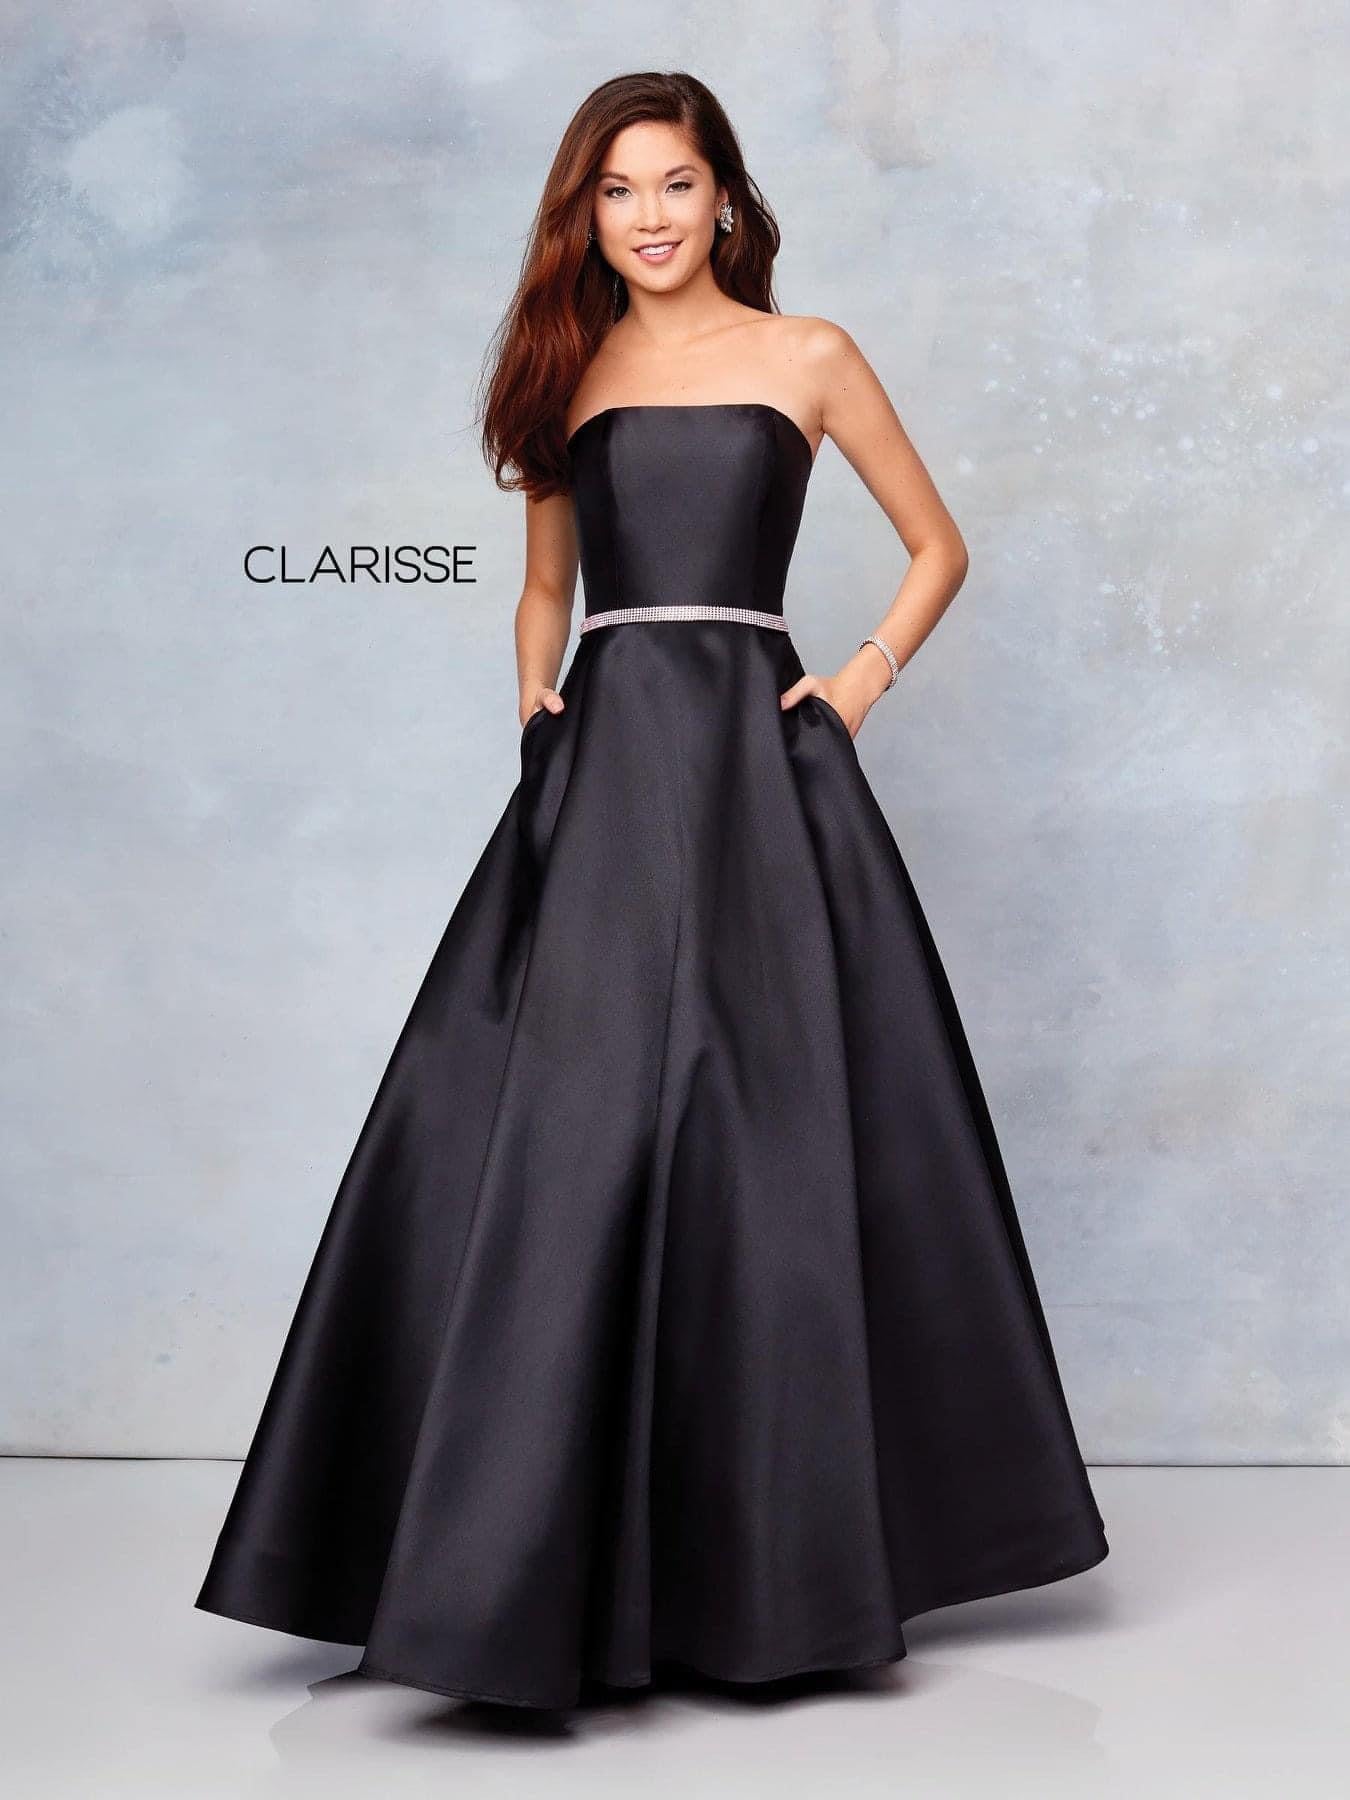 Size 20 Strapless A-line gown with an embellished belt by Clarisse